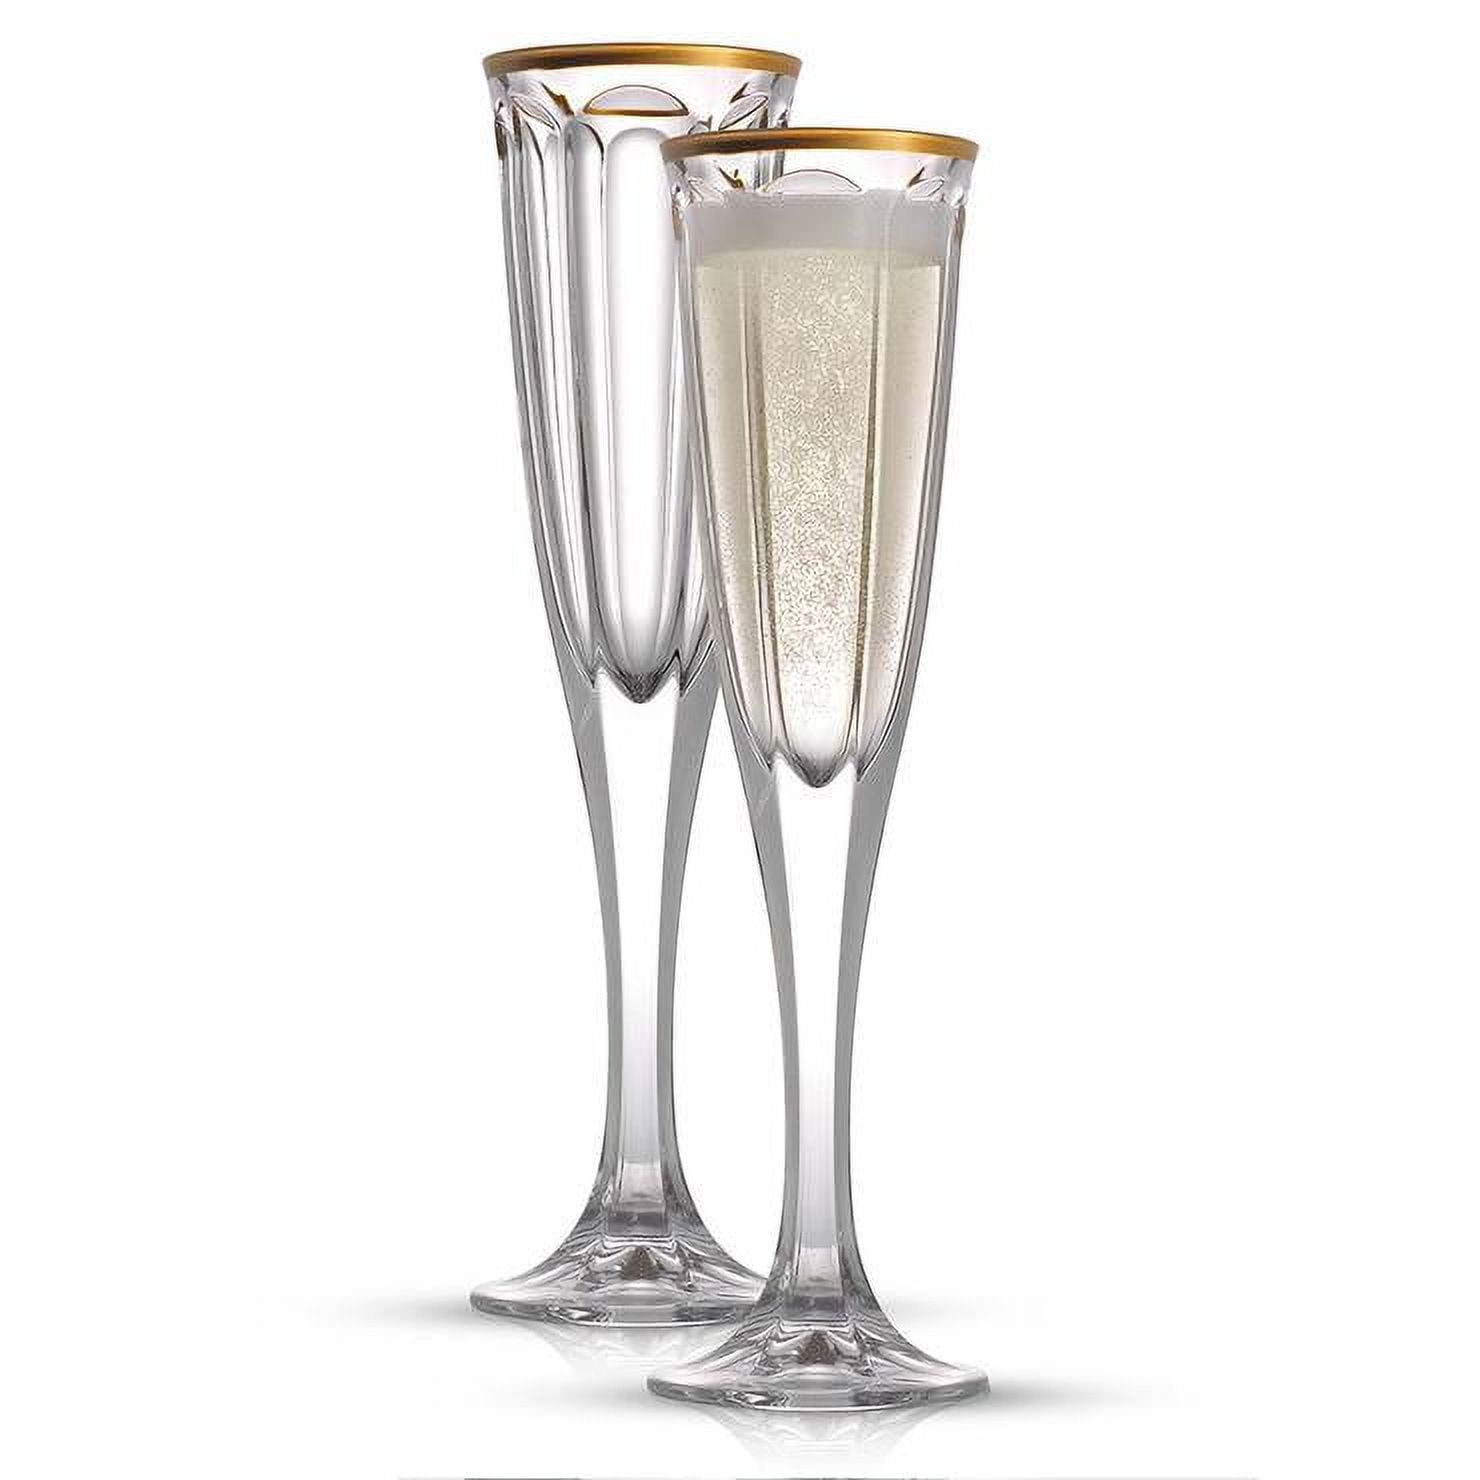 Jozen Gift Gold Champagne Flutes Set of 2 Crystal Glass Metal Base with Crystal Stones, Set of 2 Toasting Flute Pair, Wedding Anniversary Party